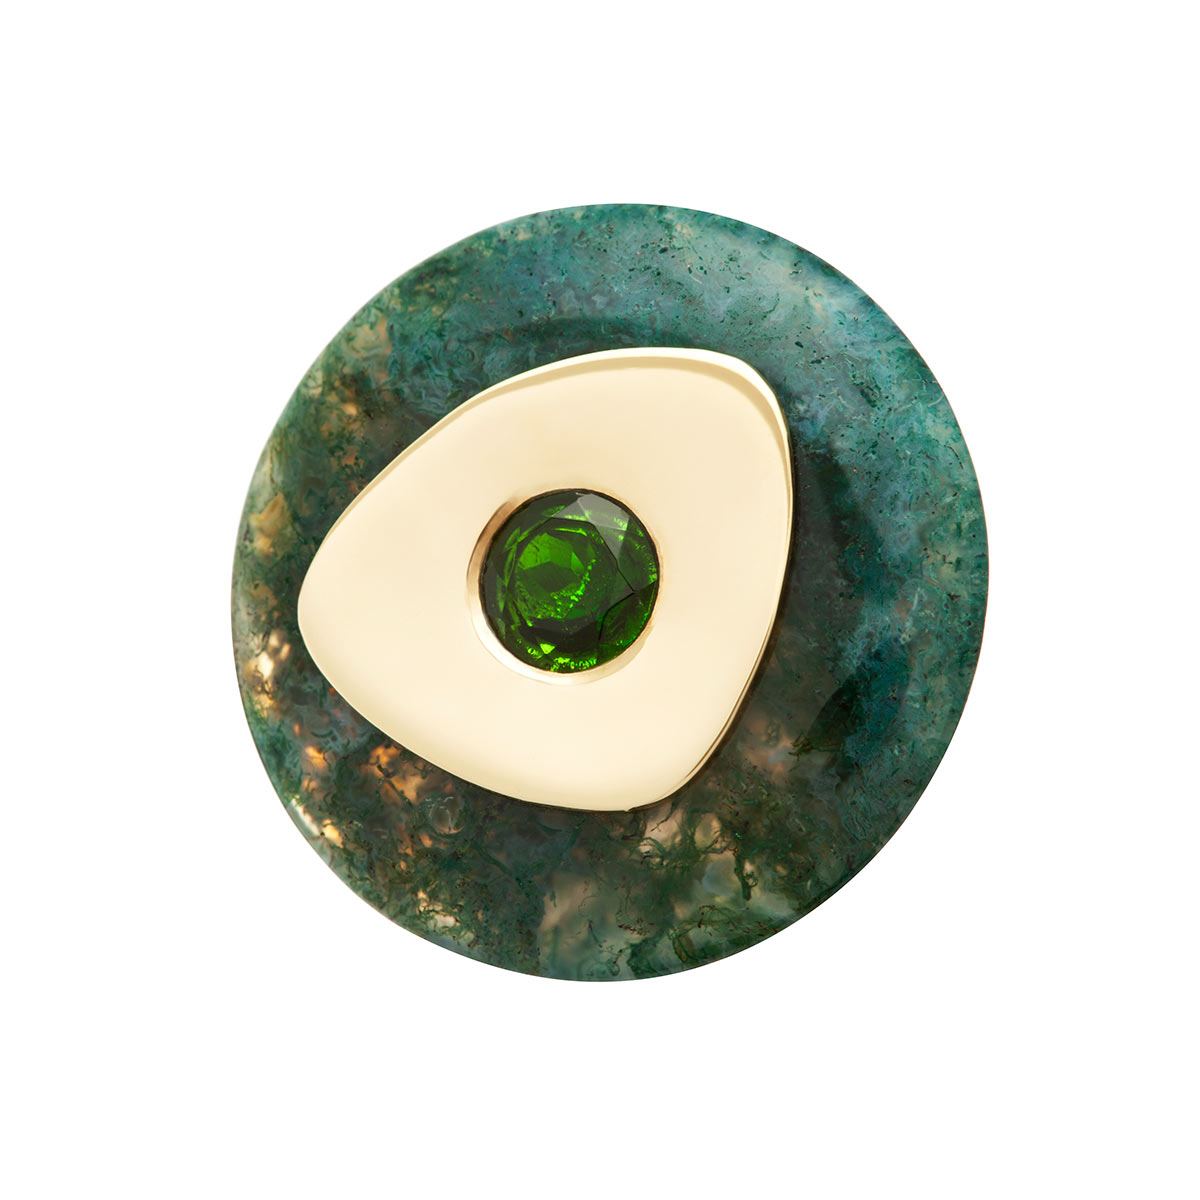 Tau handmade ring in 9k or 18k gold, sterling silver, chrome diopside and mossy agate 2 designed by Belen Bajo